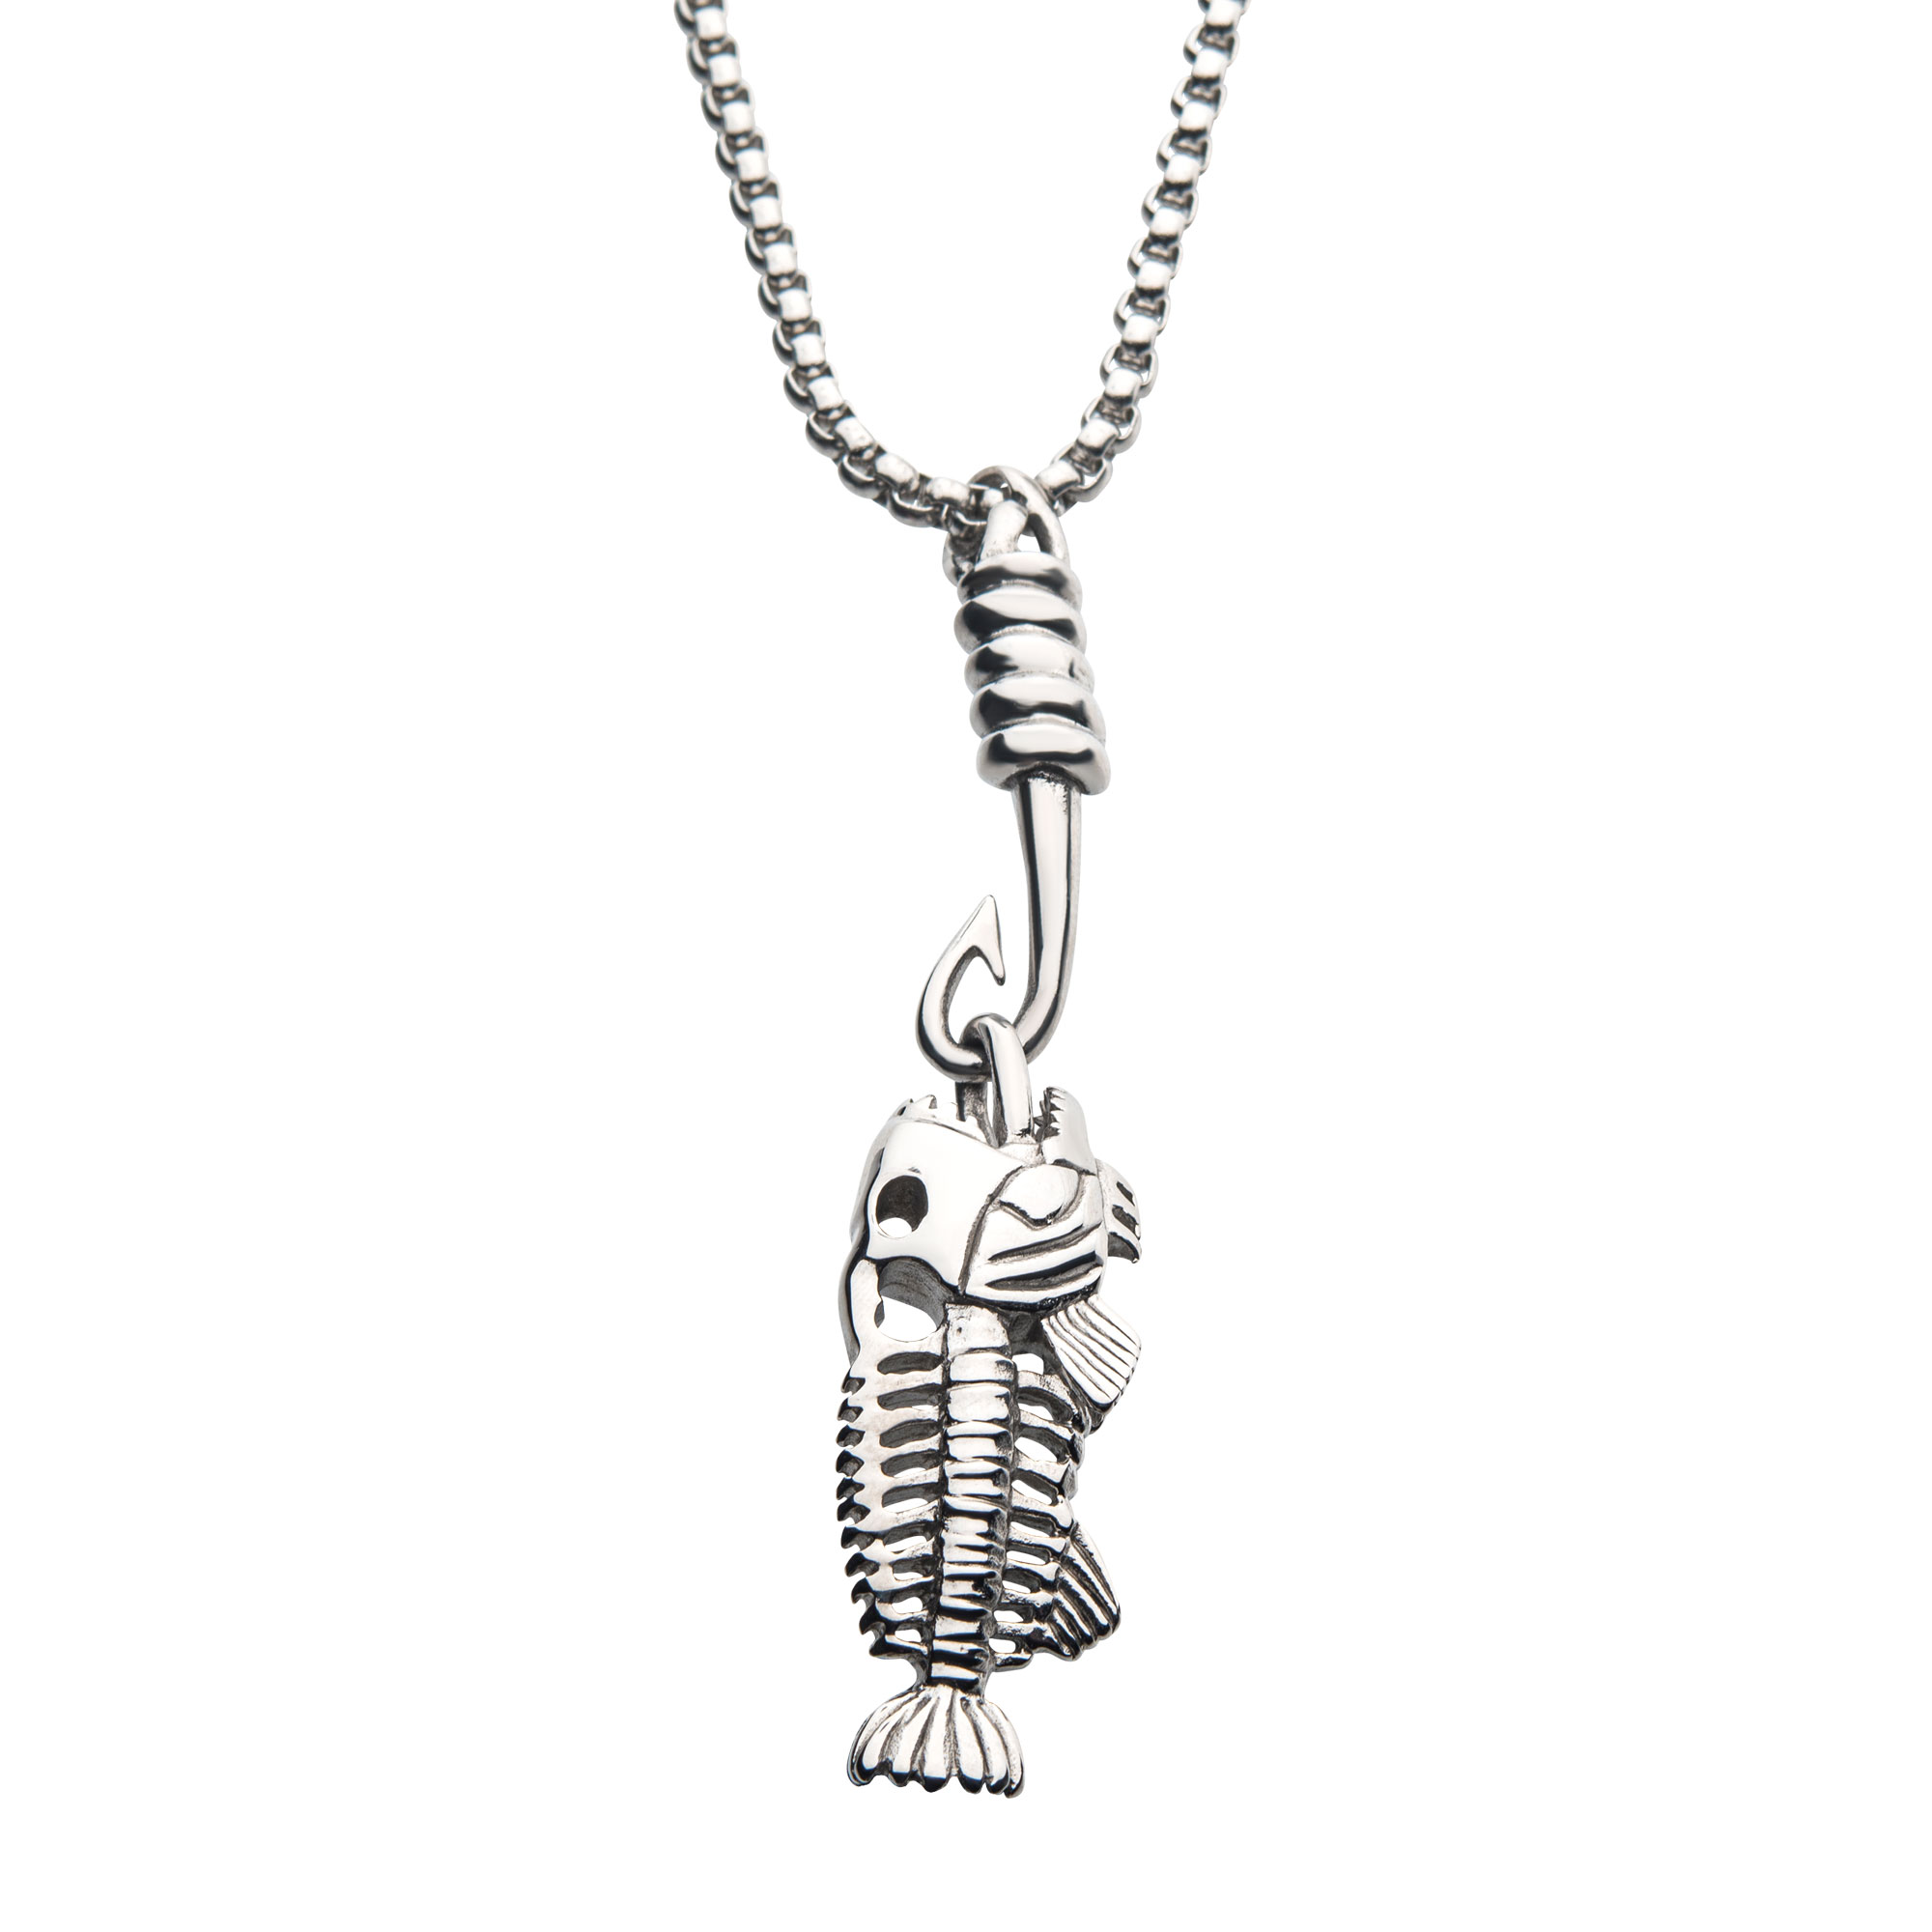 Polished Steel Fishbone Pendant with Hook & Box Chain Enchanted Jewelry Plainfield, CT